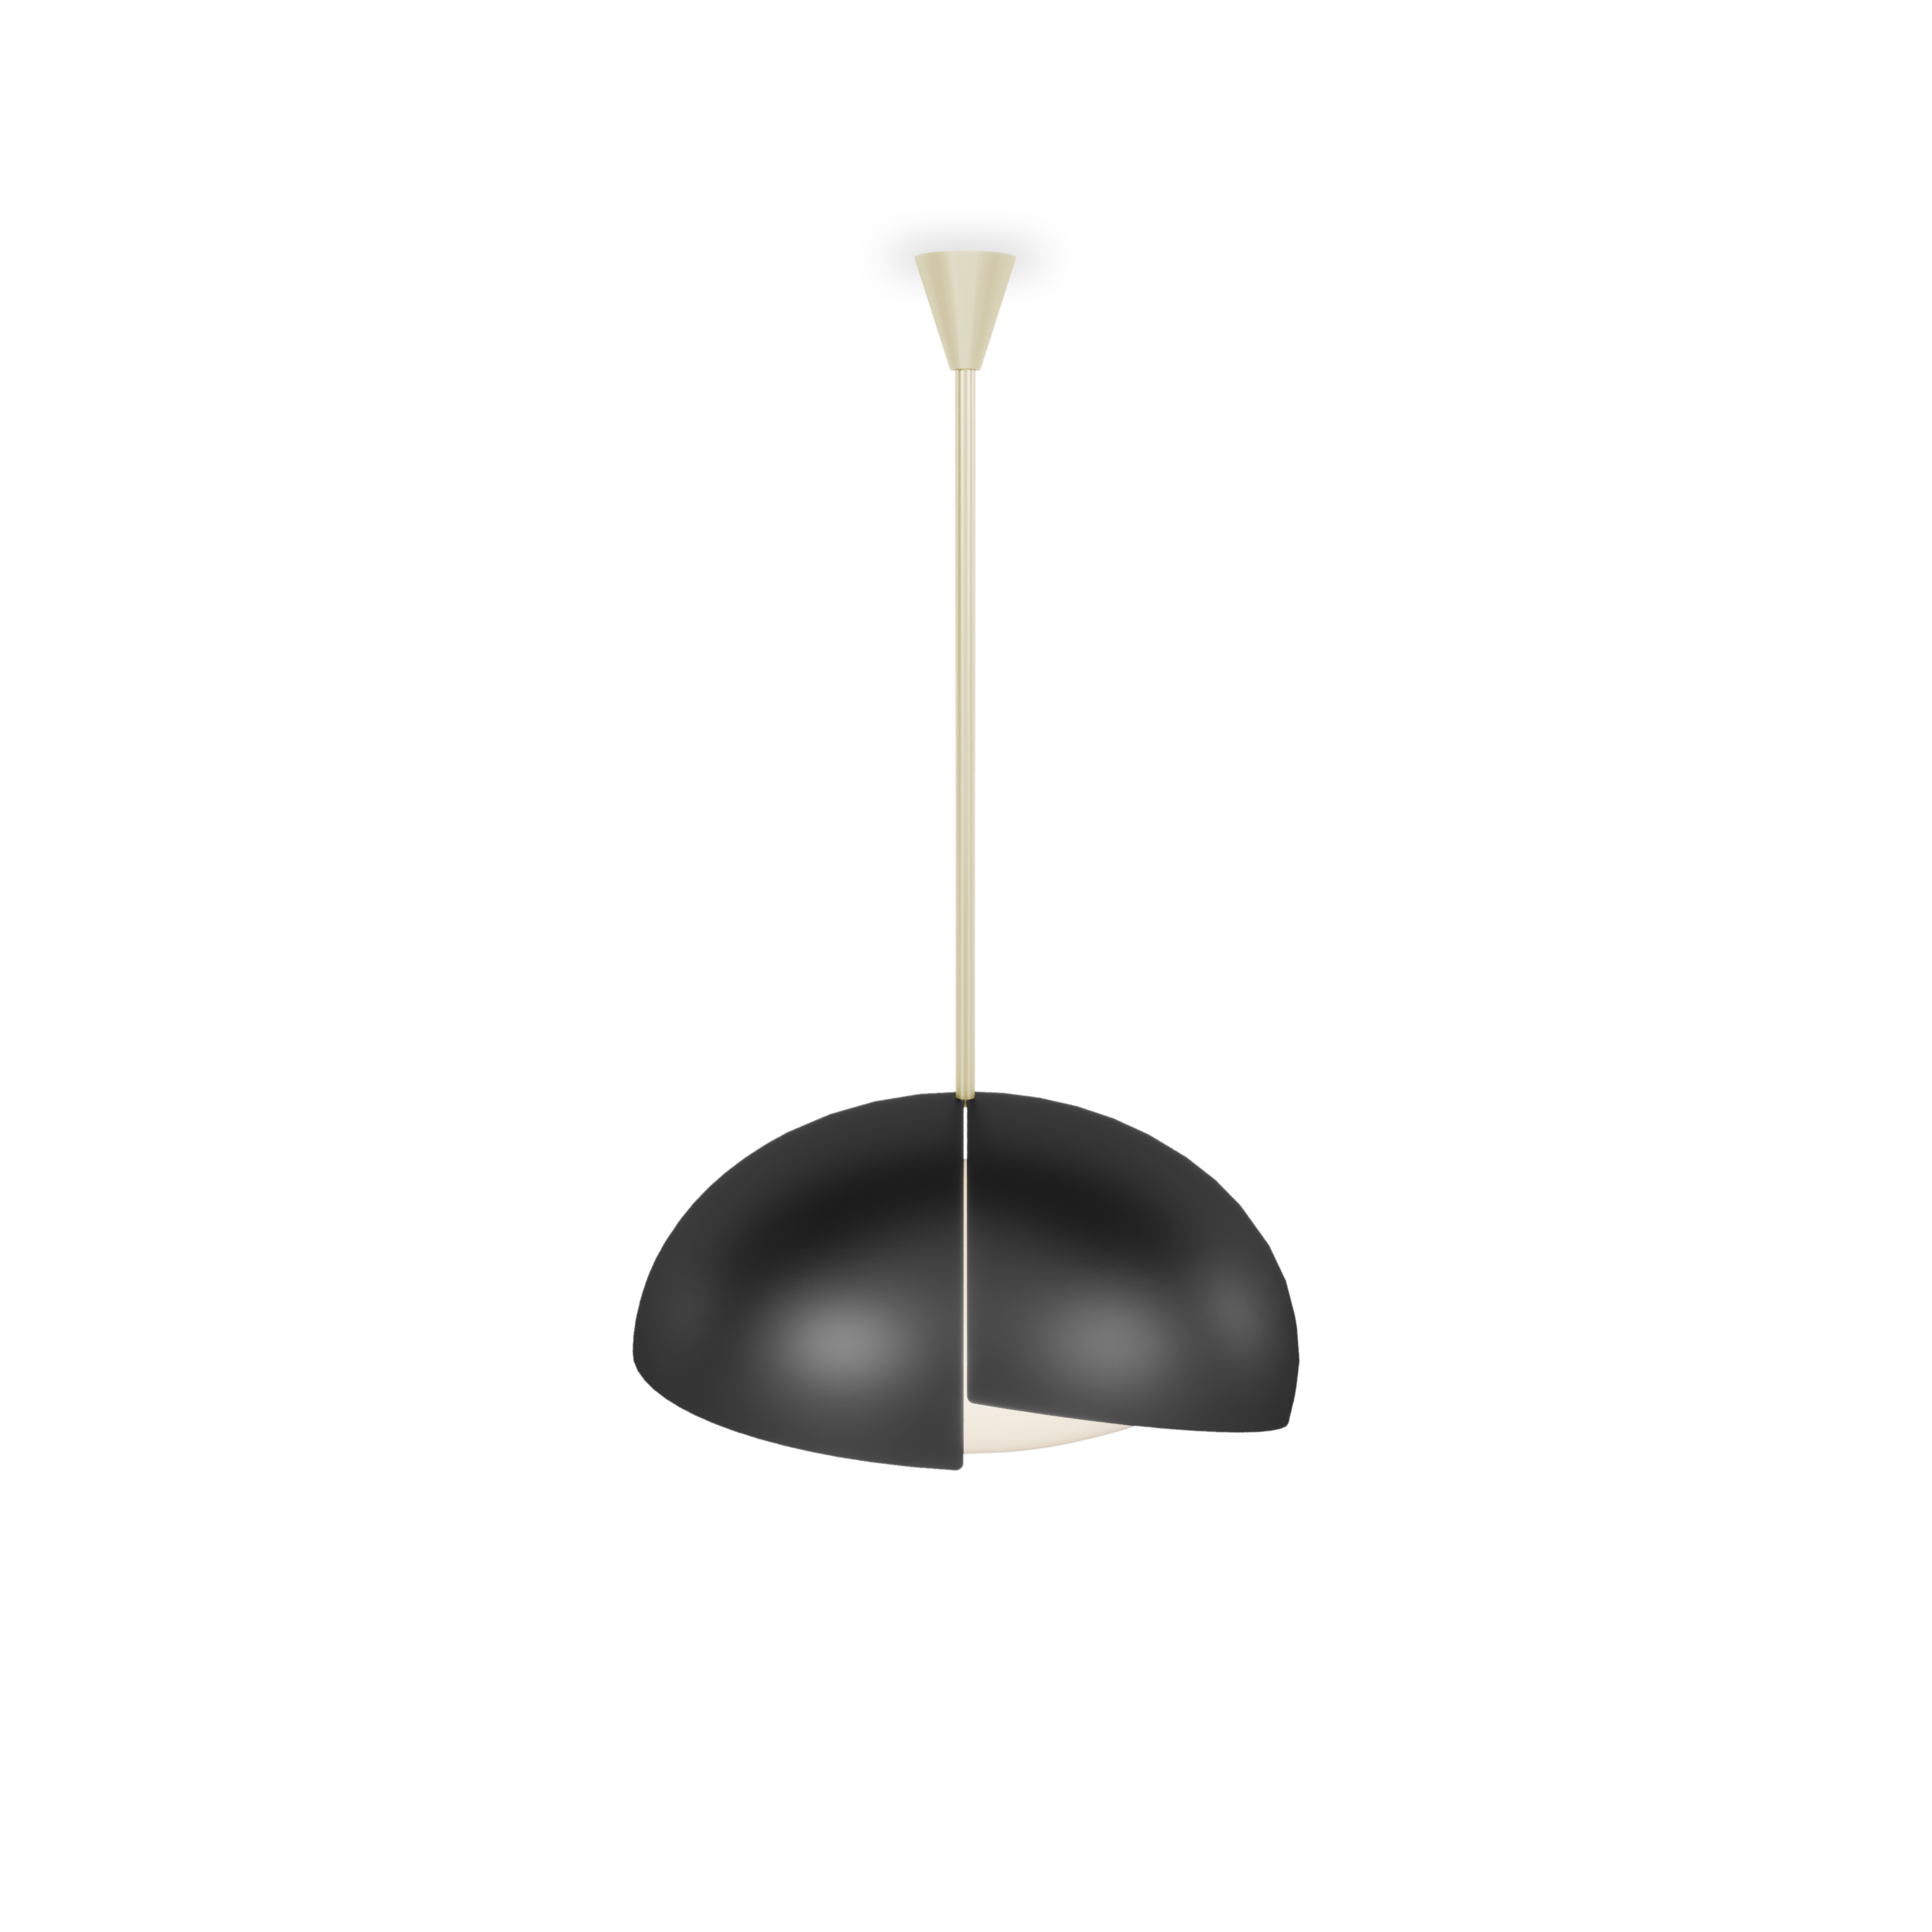 Night Fever Collection: No, It's Not a Mirage! You Can Add These Lighting Pieces To Your Cart Right Now